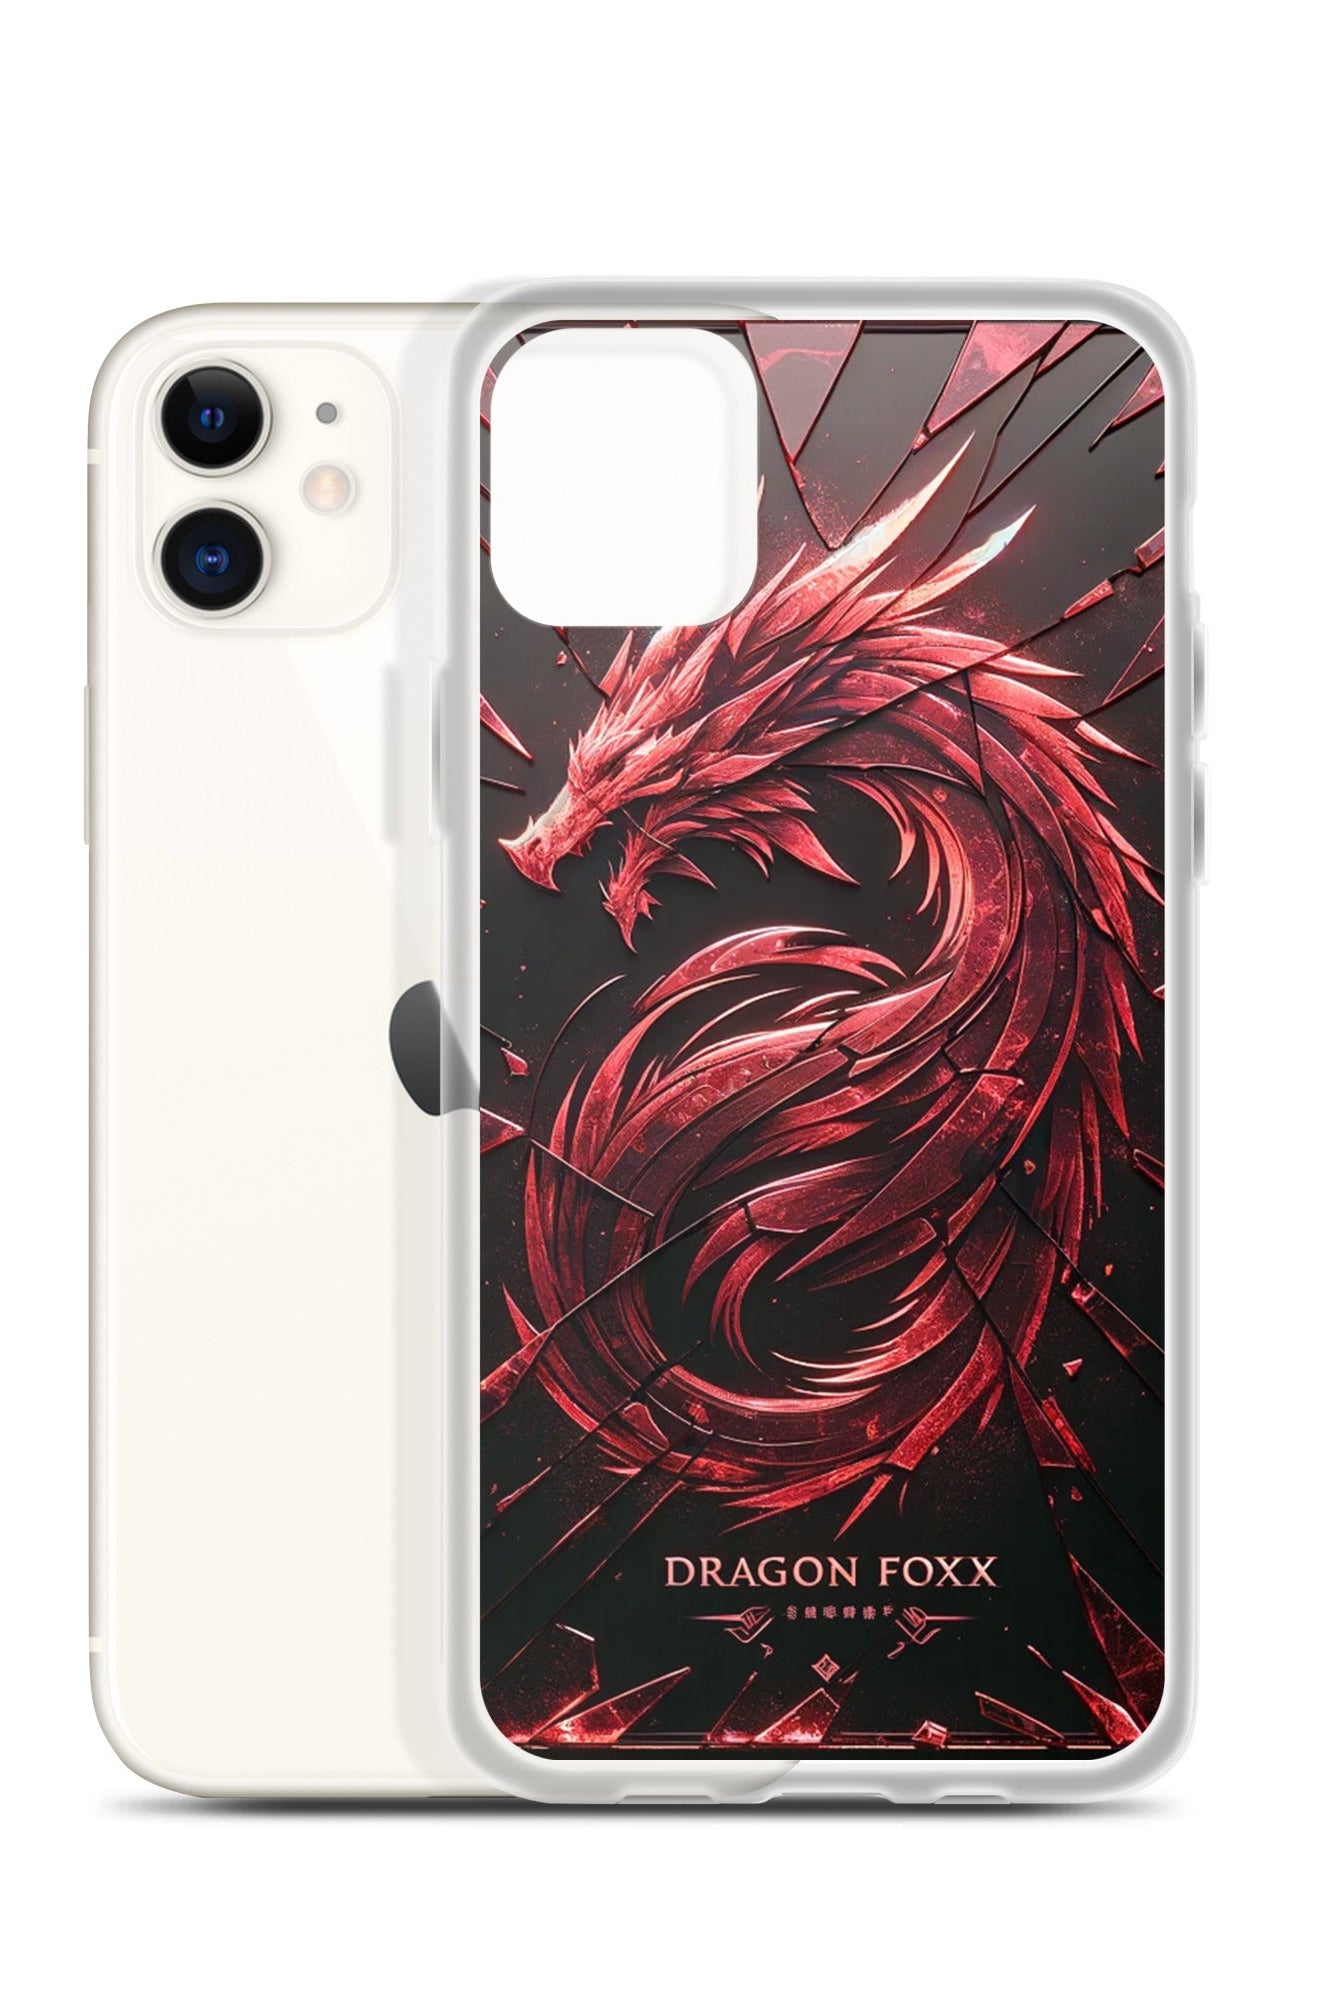 DRAGON FOXX™ Red Dragon Phone Case for iPhone® - Phone Case for iPhone® - DRAGON FOXX™ - DRAGON FOXX™ Red Dragon Phone Case for iPhone® - 7805351_10994 - iPhone 11 - Red/Black/Clear - Accessories - Dragon Foxx™ - DRAGON FOXX™ Phone Case for iPhone®